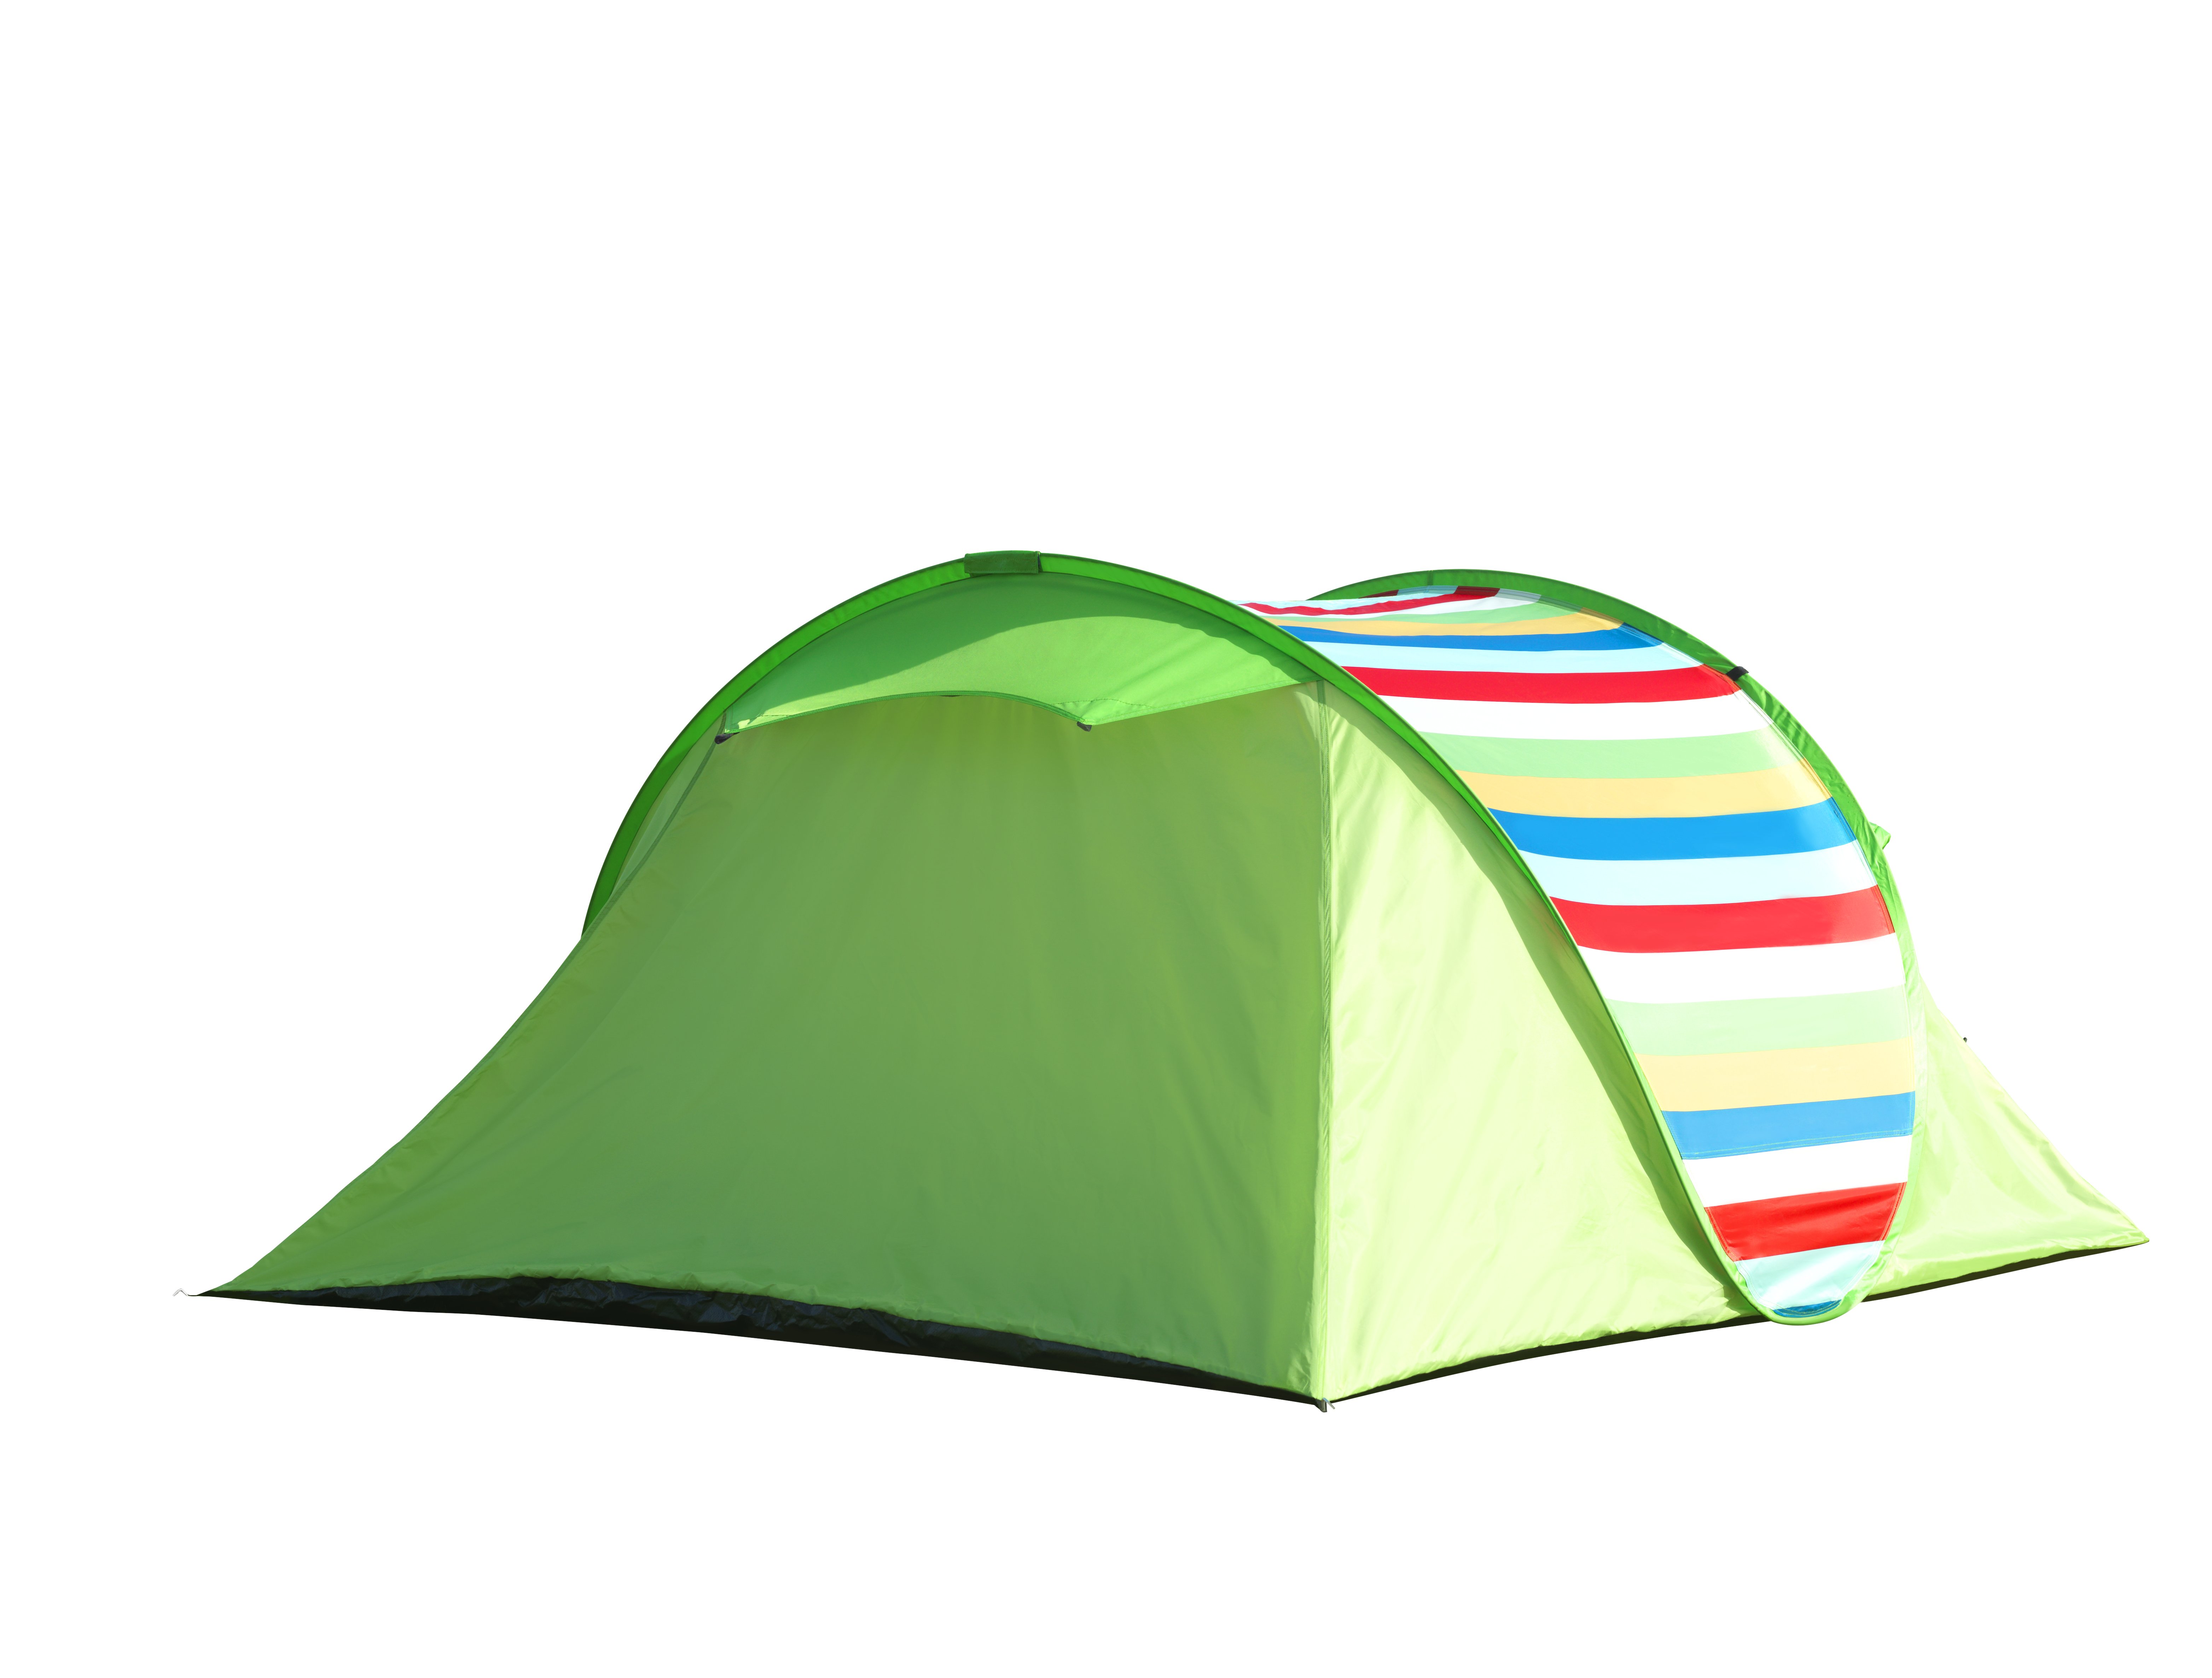 Pro Action 4 Person 1 Room Pop Up Camping Tent